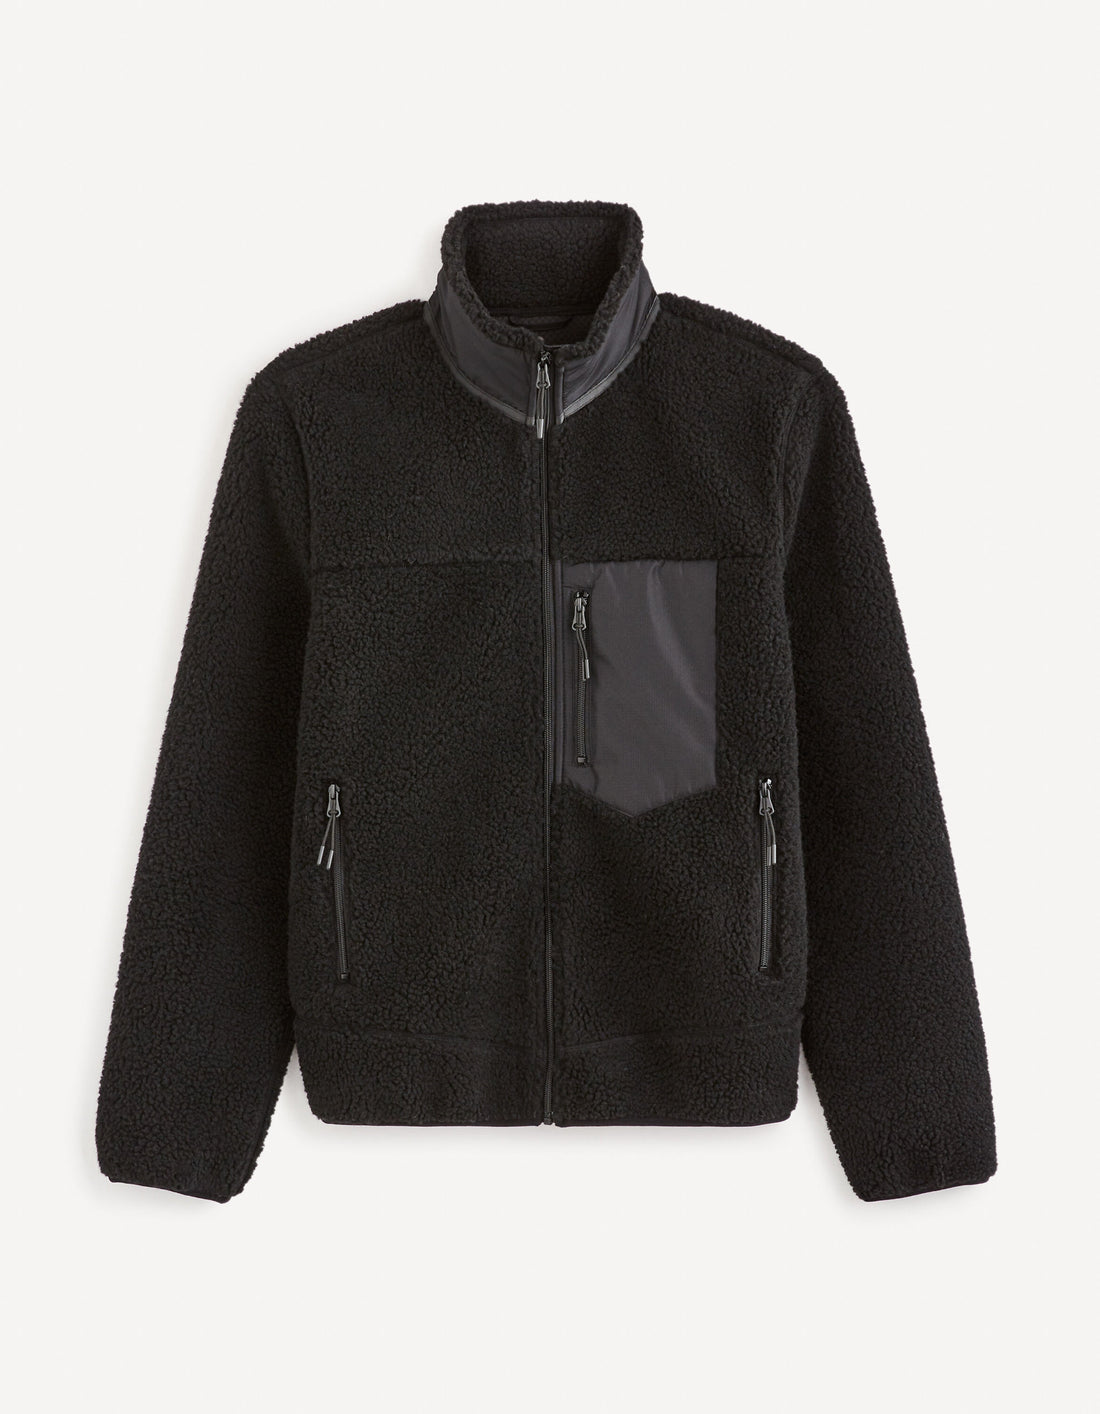 Sherpa Jacket With Stand-Up Collar_FUCURLY_BLACK_02